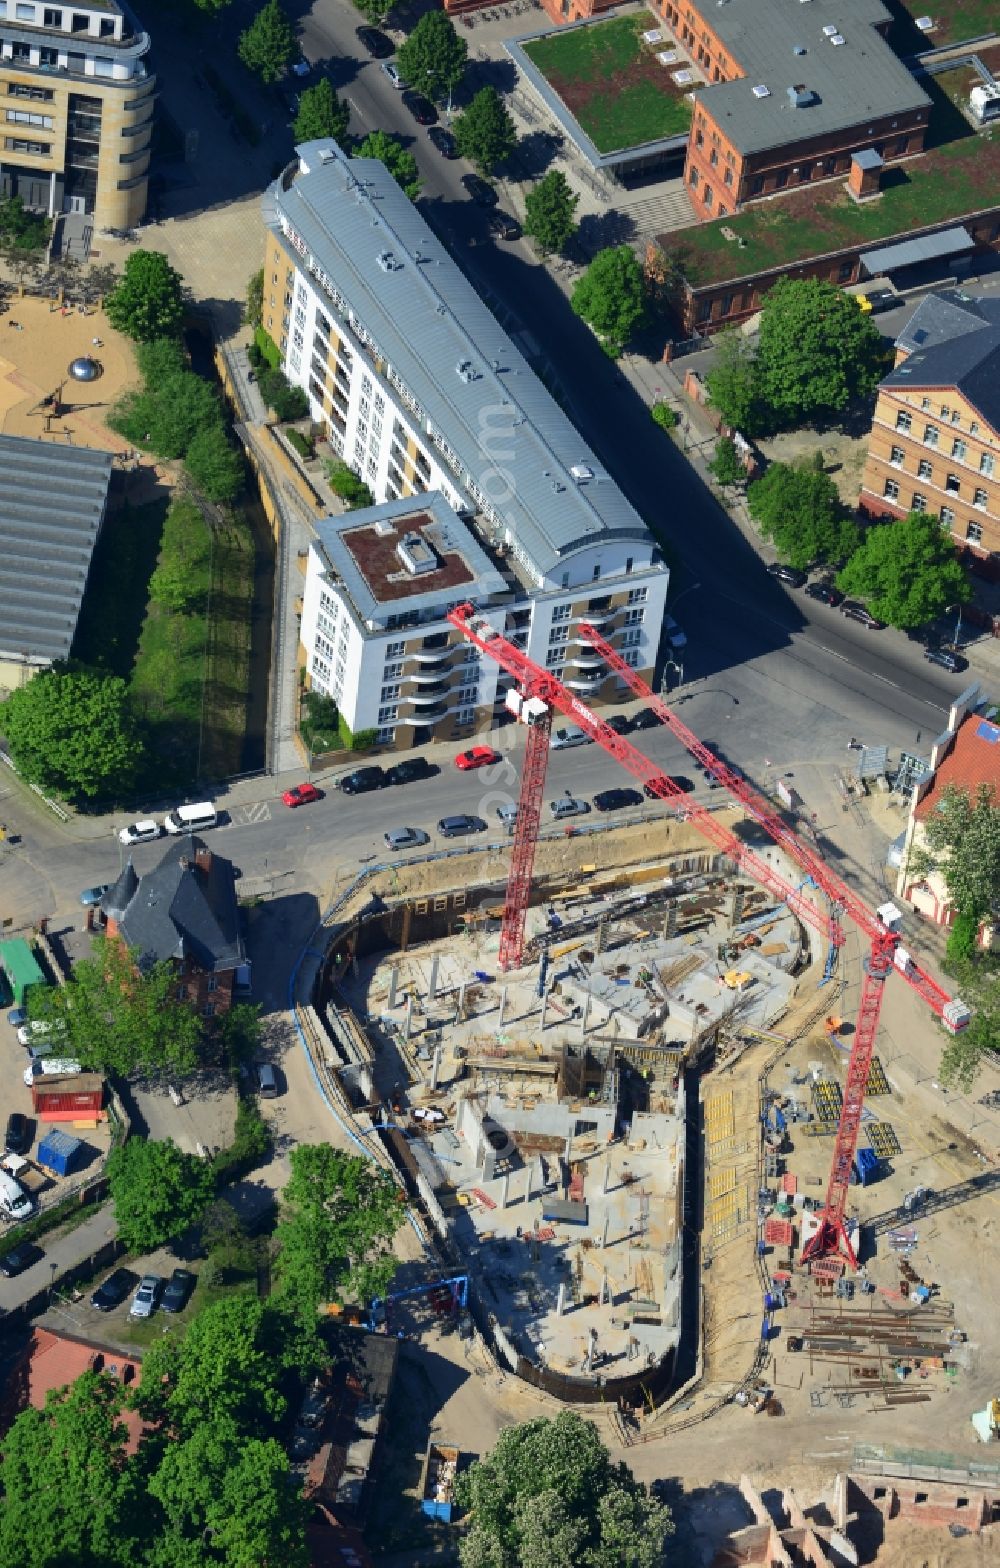 Berlin Mitte from above - Construction site to build new research and laboratory building for life sciences in the district of Mitte in Berlin